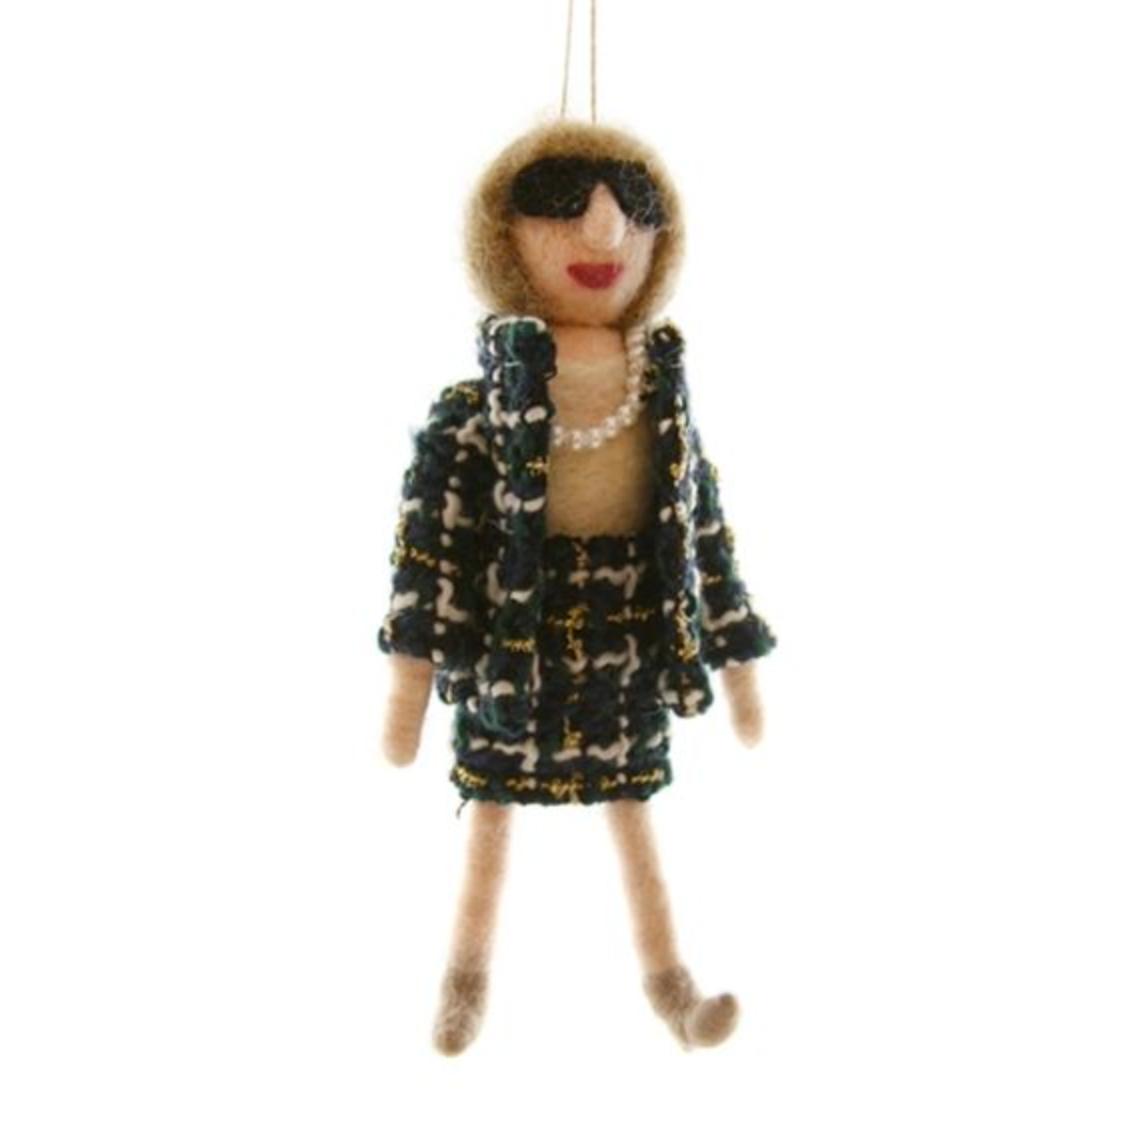 Felt holiday ornament of designer Anna Wintour - available at Scout House.